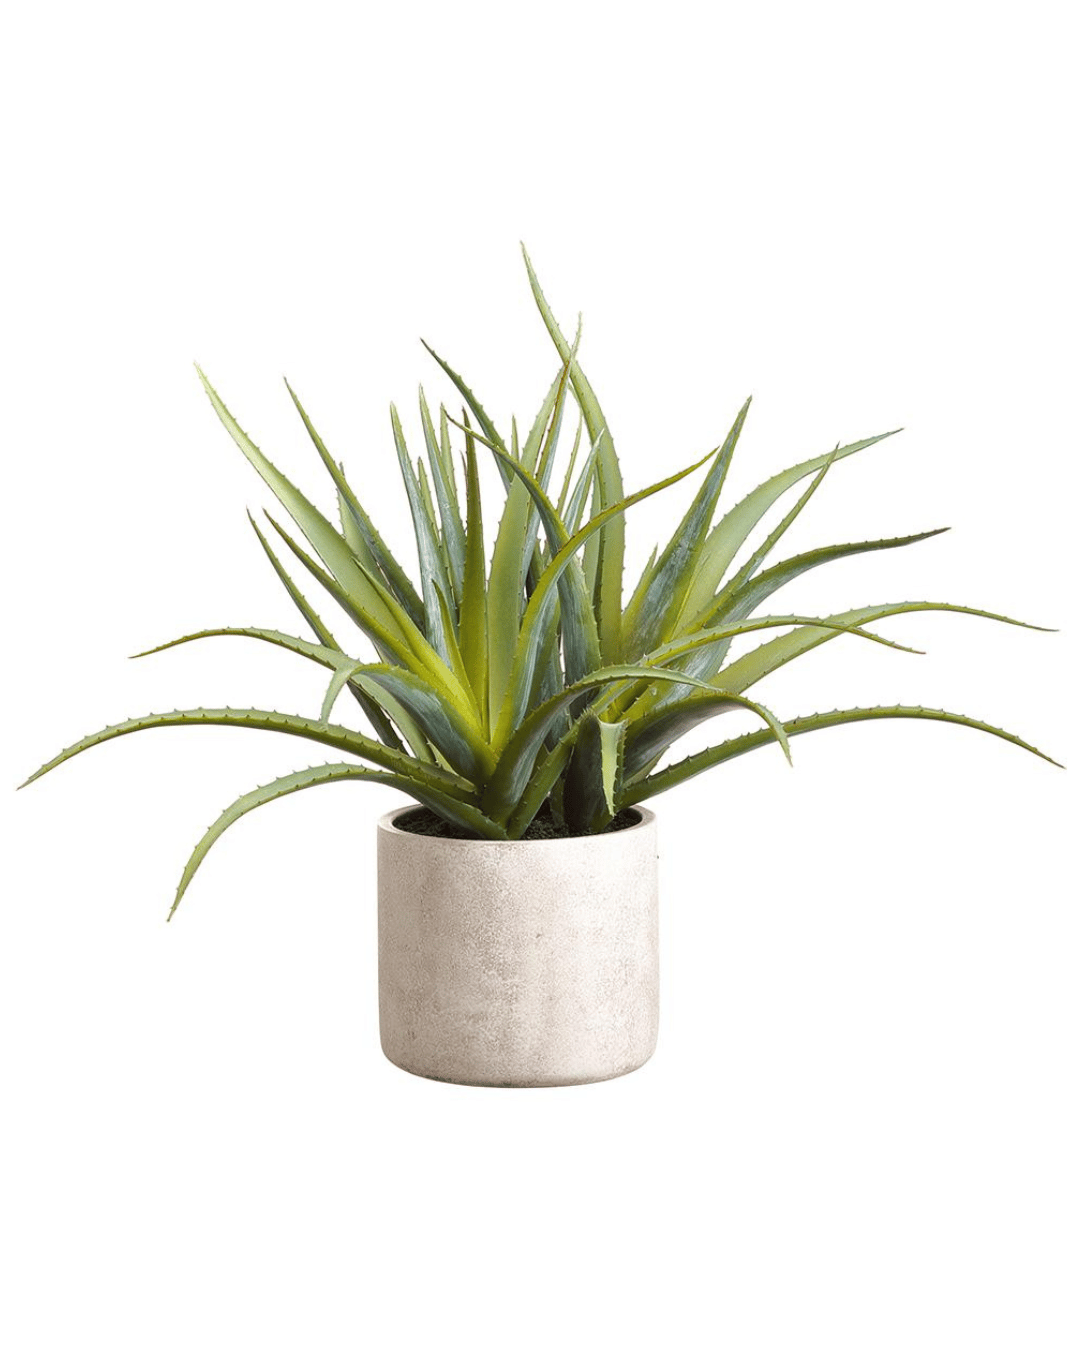 A 21" AllState Floral And Craft Aloe Plant in Cement Pot with spiked, green leaves in a round, gray stone pot isolated on a white background in Scottsdale, Arizona.